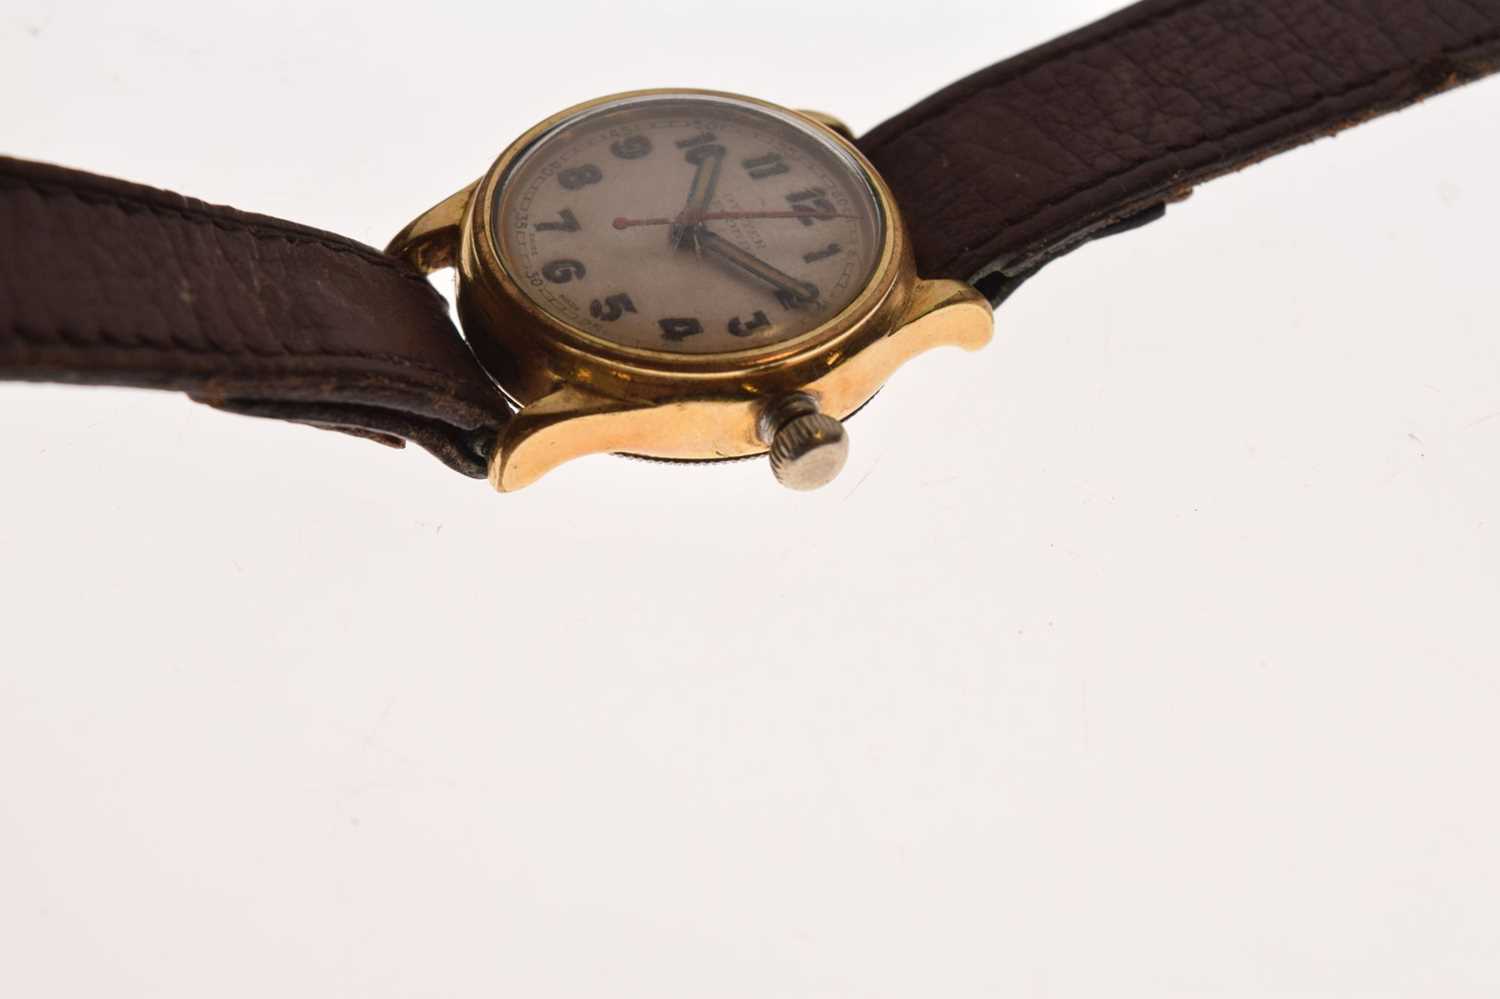 Rolex - 1940s Oyster Recorda manual wind wristwatch - Image 2 of 10